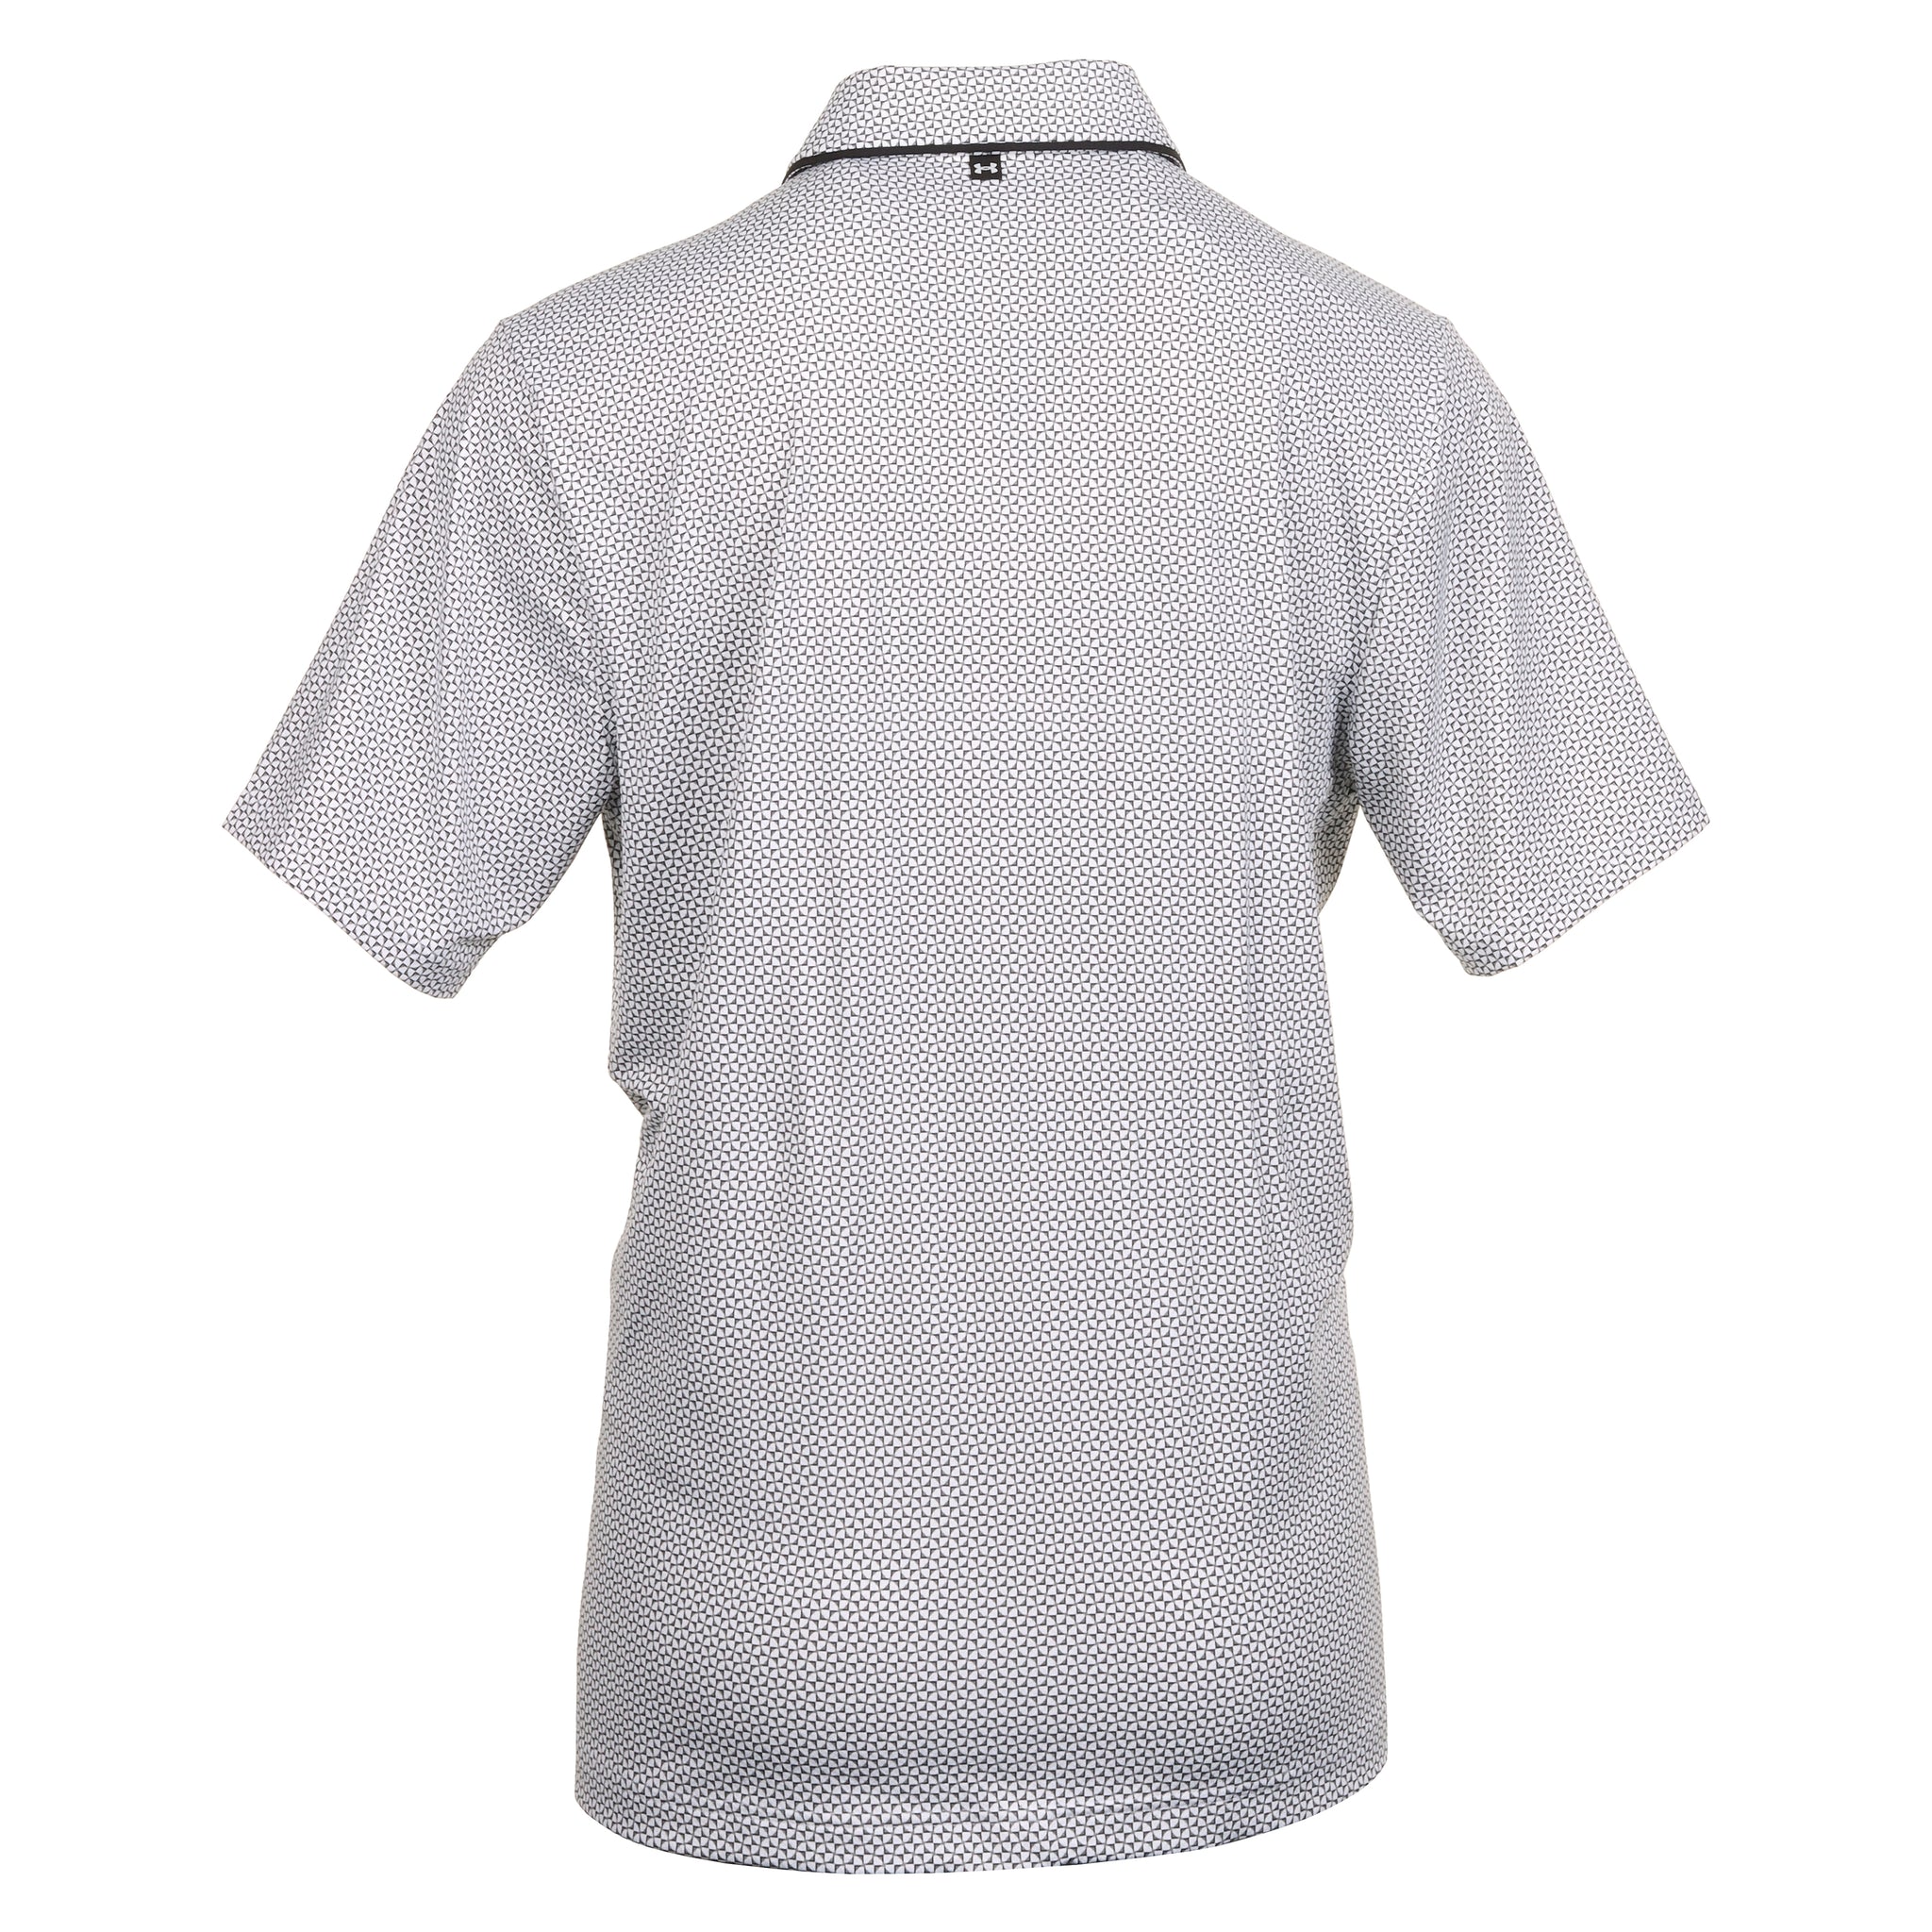 Under Armour Golf Iso-Chill Verge Shirt 1377366 White Halo Grey Black 102